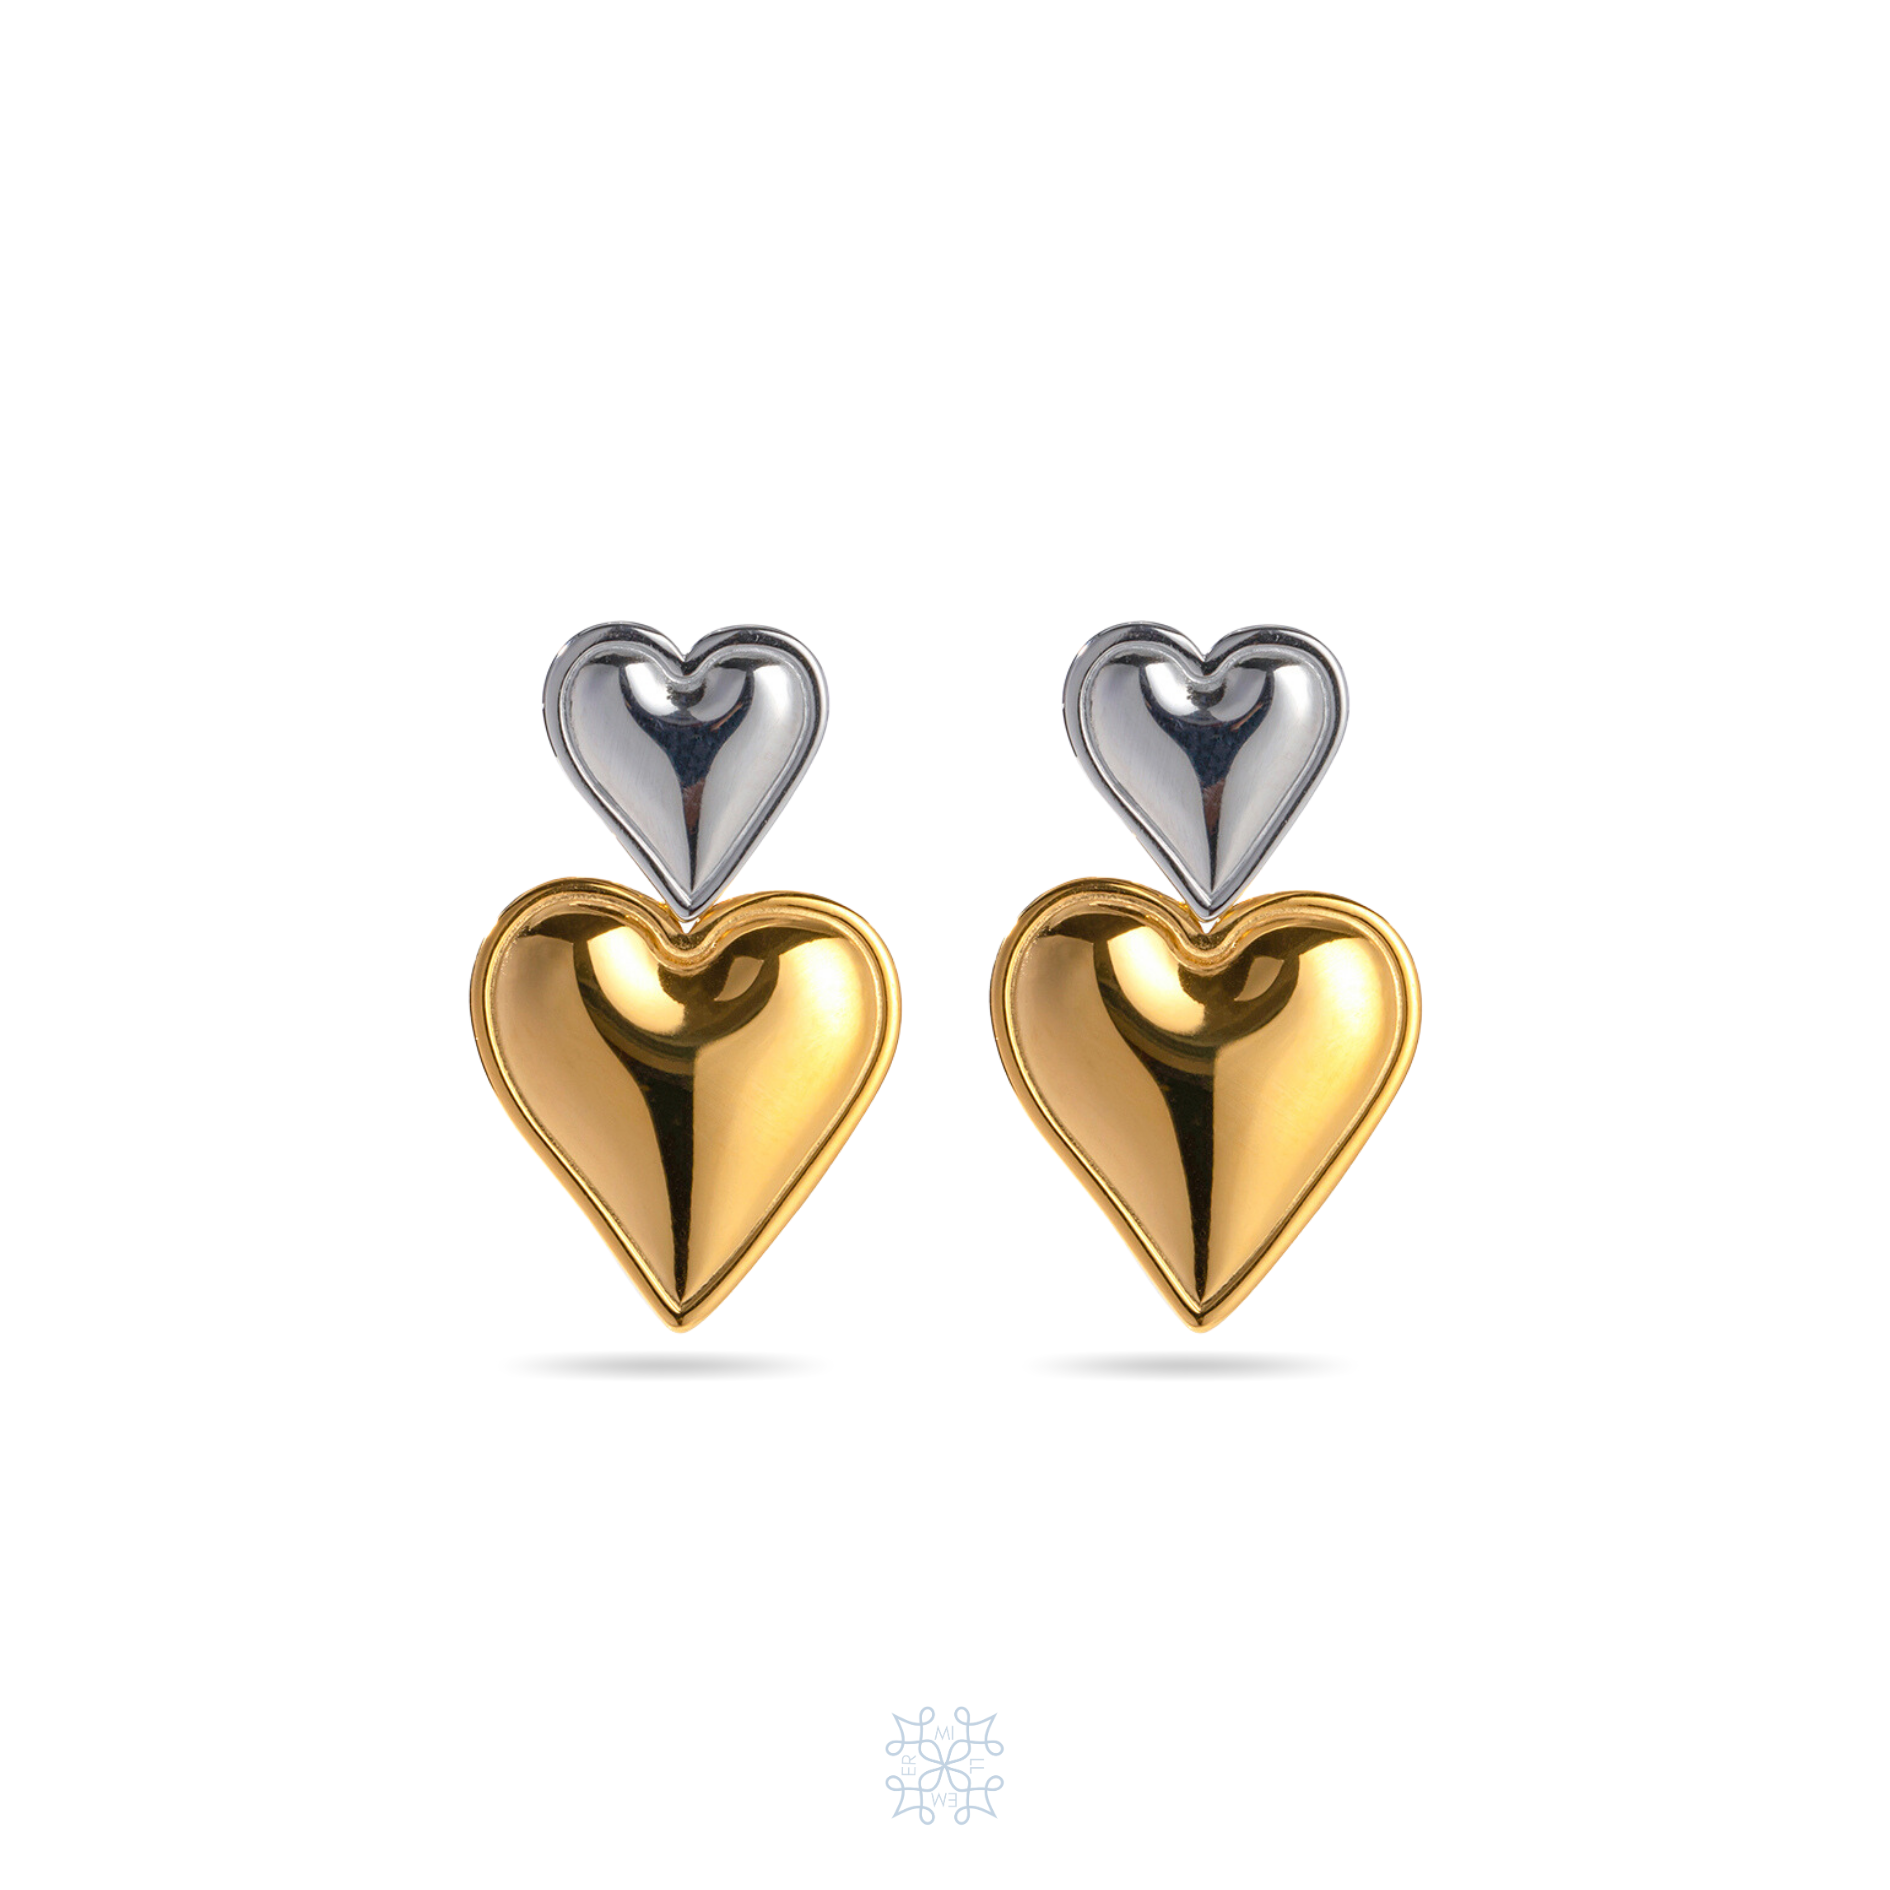 Hearts Gold and Silver Drop Earrings. Smaller Silver Heart on top and bigger gold heart in the bottom.